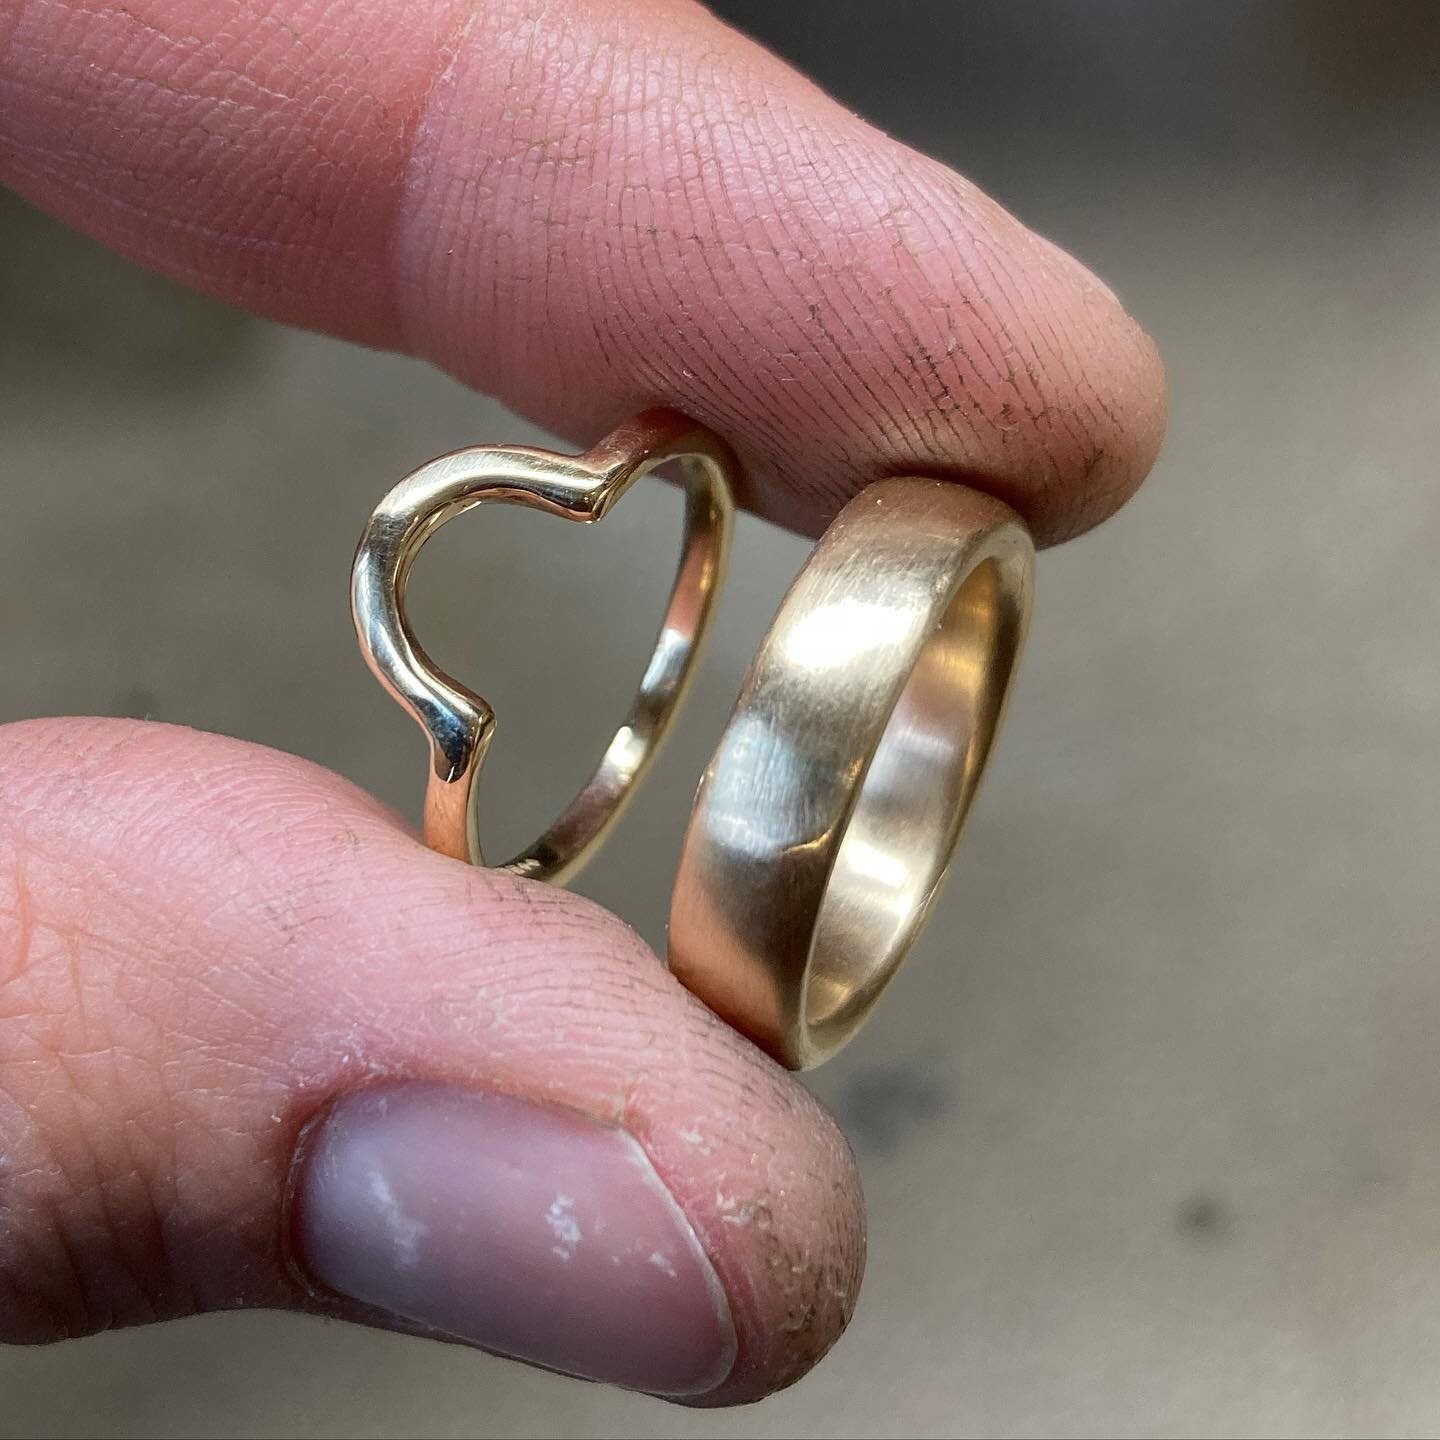 His &amp; hers wedding bands for Bethany and Ben made using their inherited gold. Beth wanted something that would sit nicely around her vintage engagement ring. The end result? A perfectly snug contour ring that compliments rather than detracts. An 